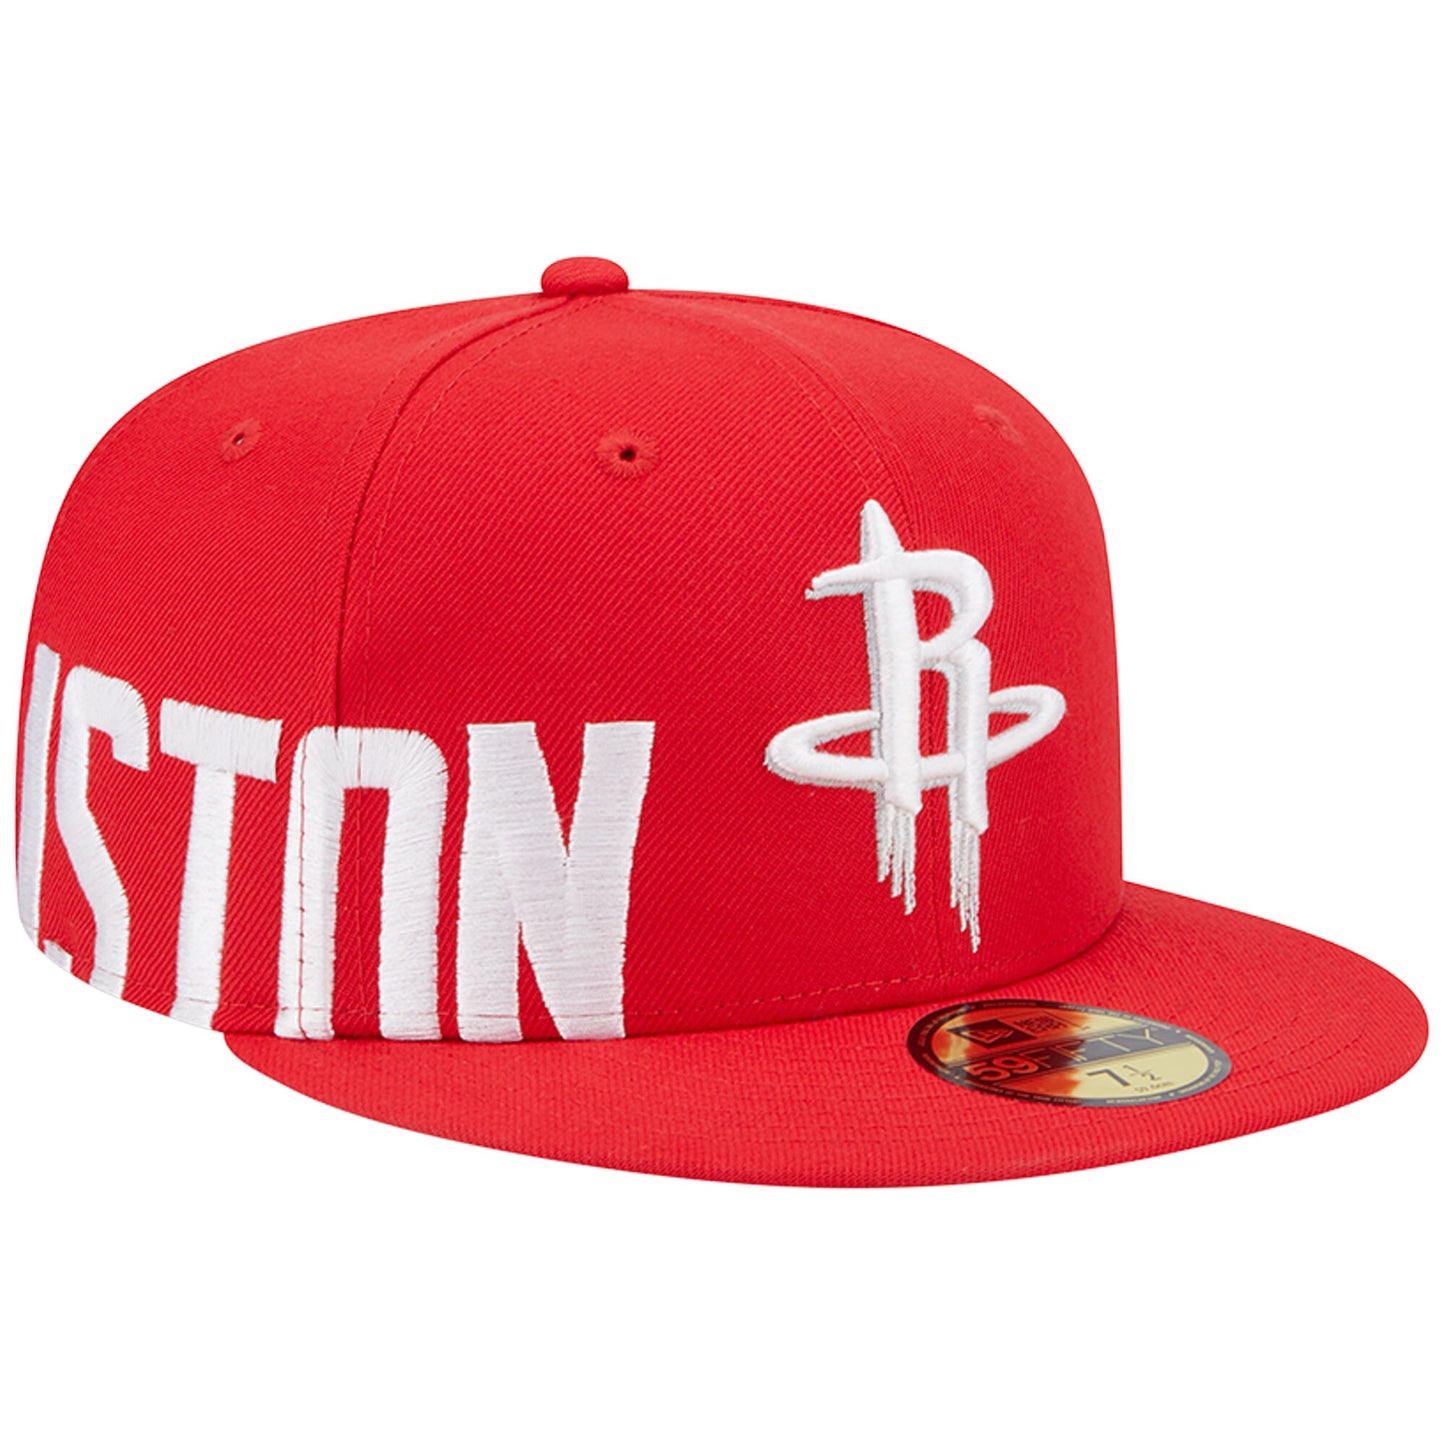 Houston Rockets New Era Side Arch Jumbo 59FIFTY Fitted Hat - Red